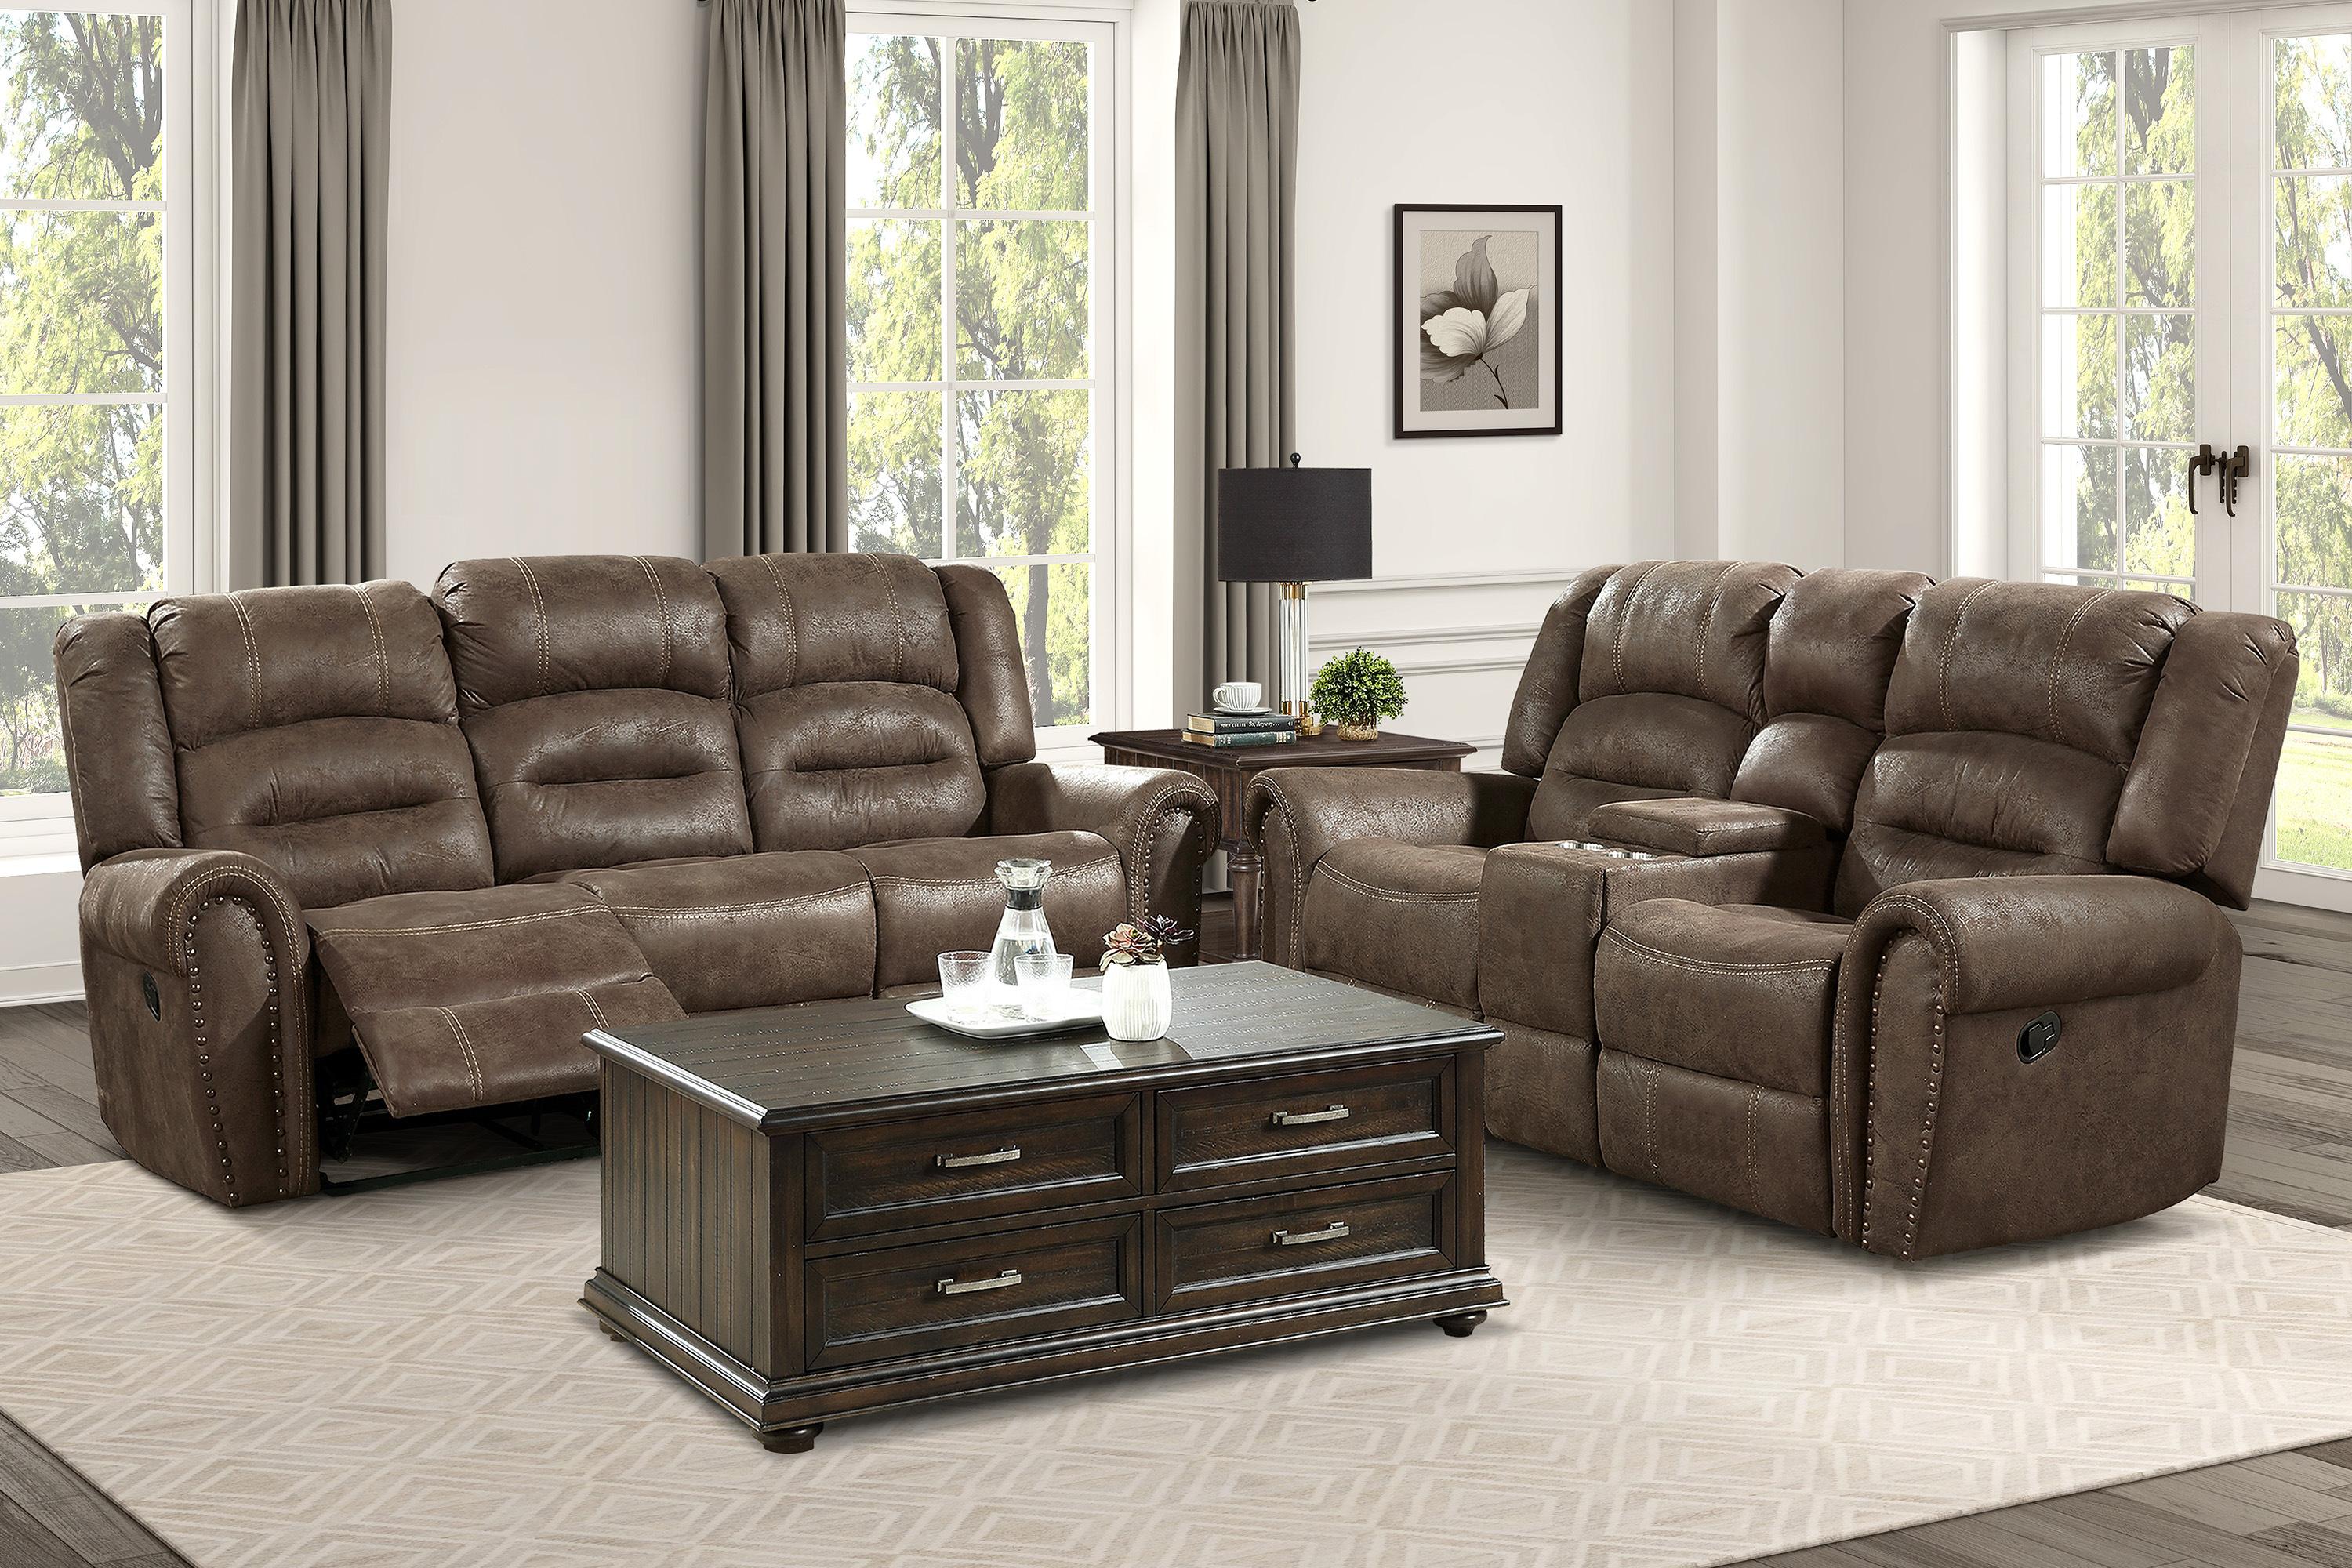 Transitional Reclining Set 9467BR-2PC Creighton 9467BR-2PC in Brown Microfiber